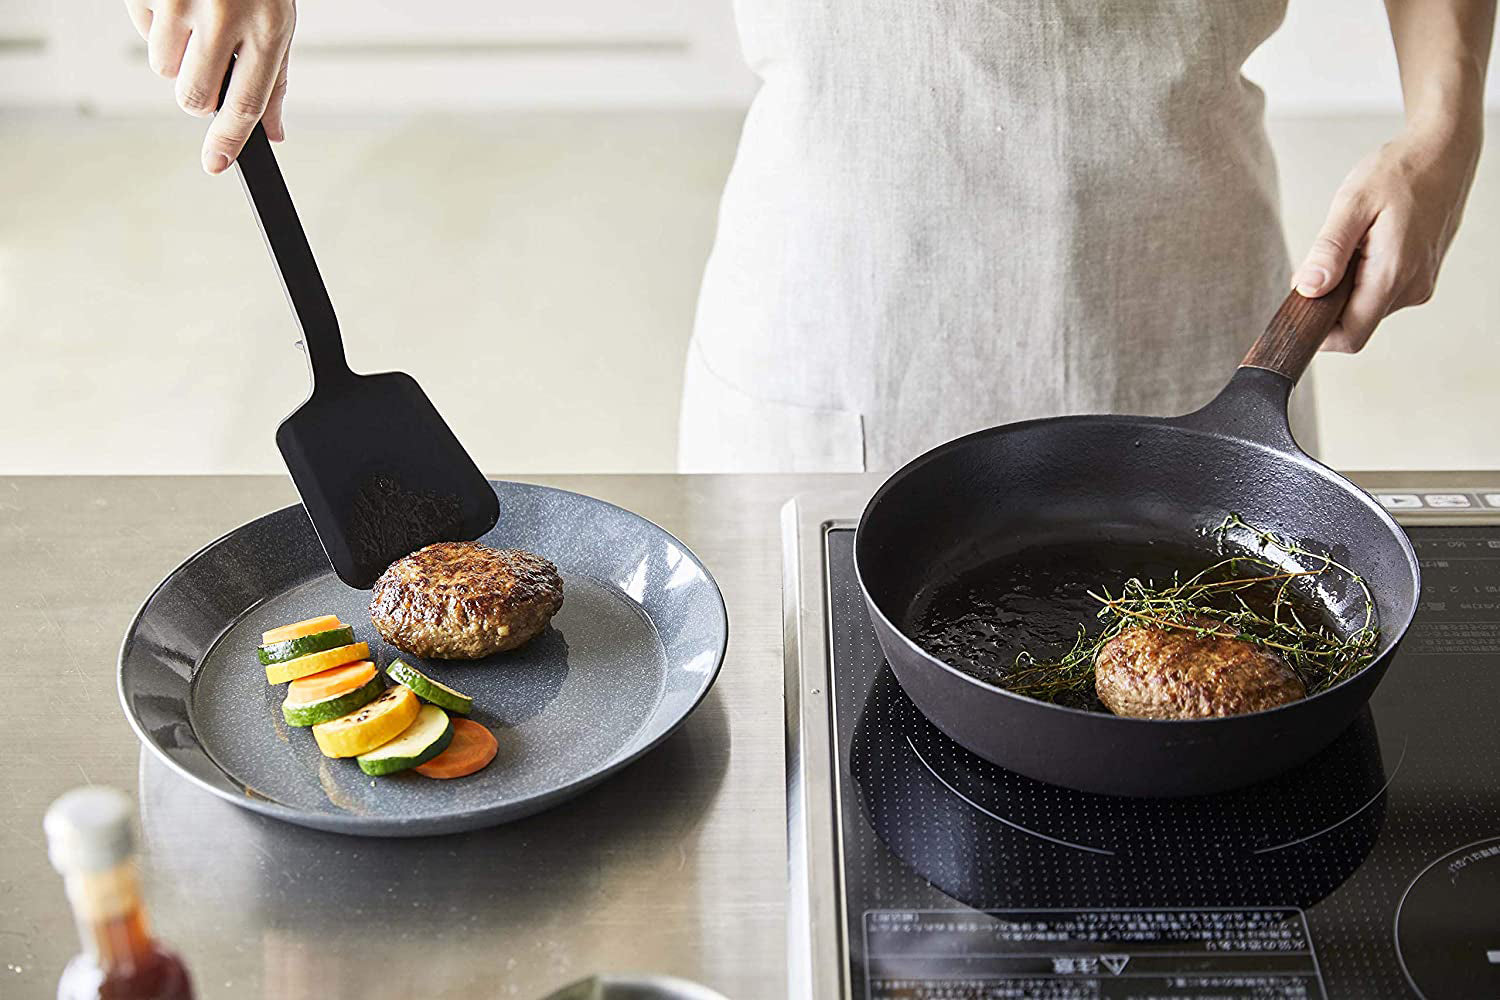 View 12 - Black Floating Spatula serving food in kitchen by Yamazaki Home.